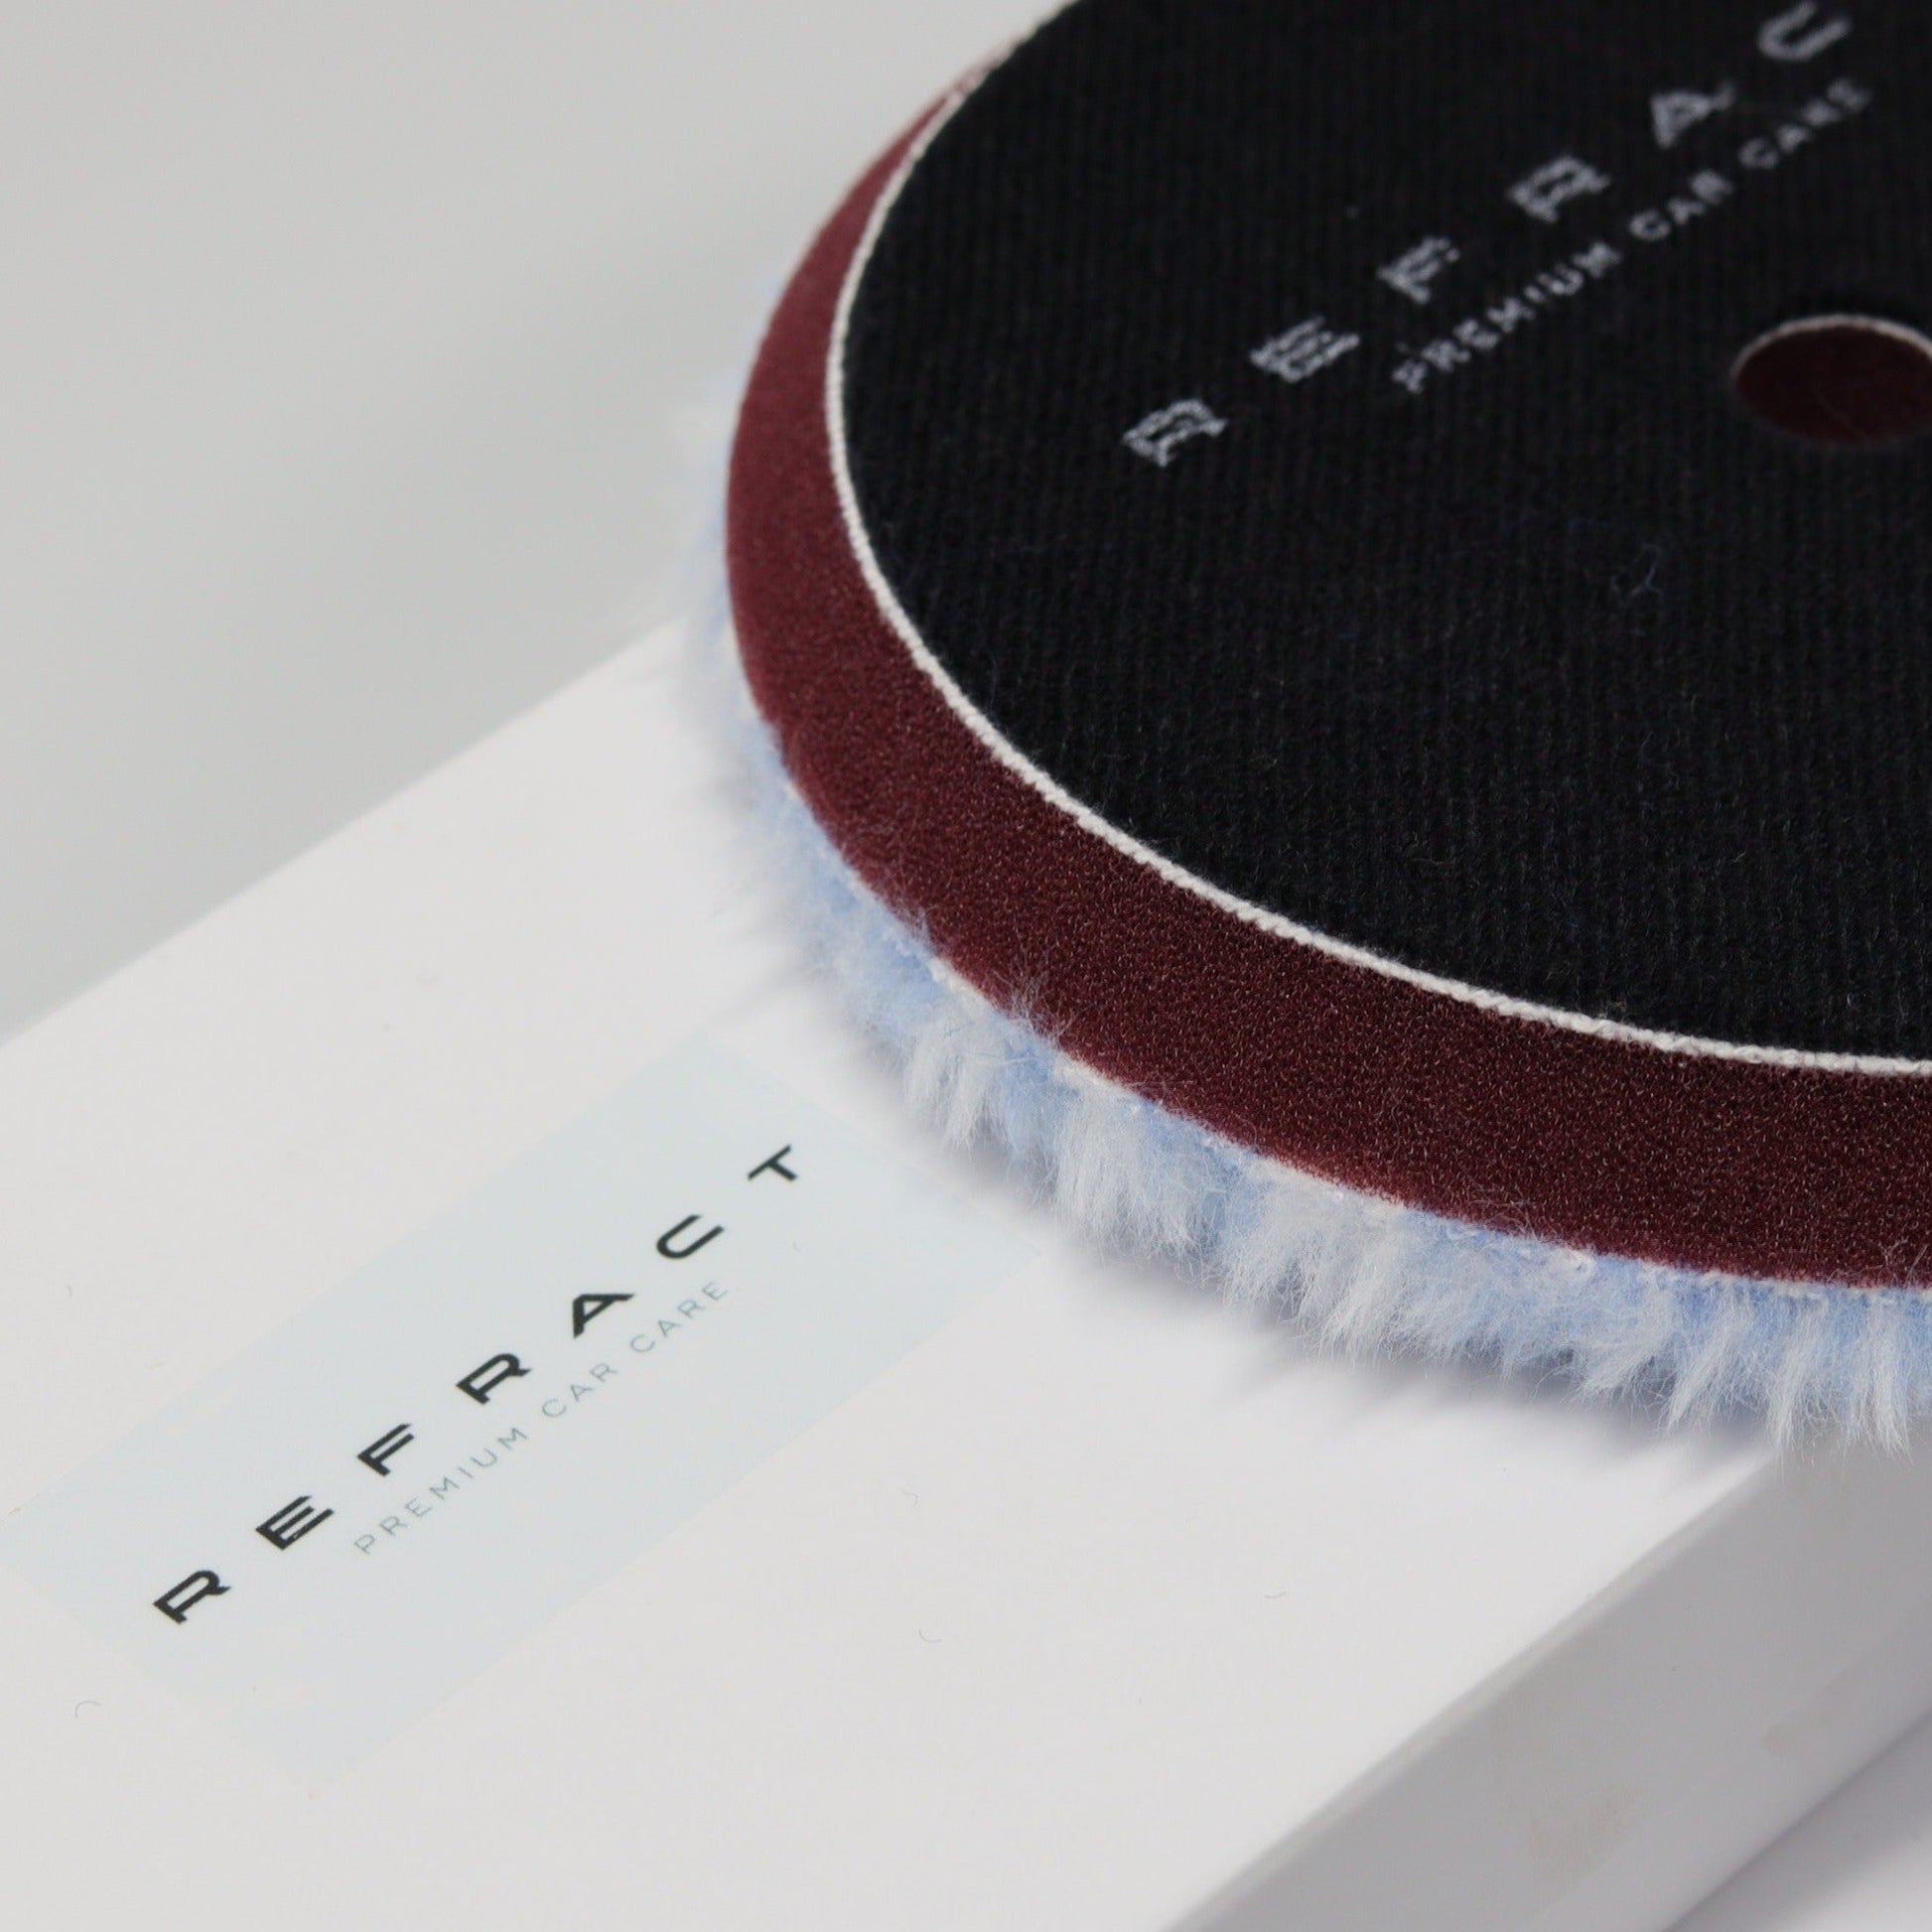 Refract Premium Car Care Products Hybrid One Step Polishing Pads $21.95